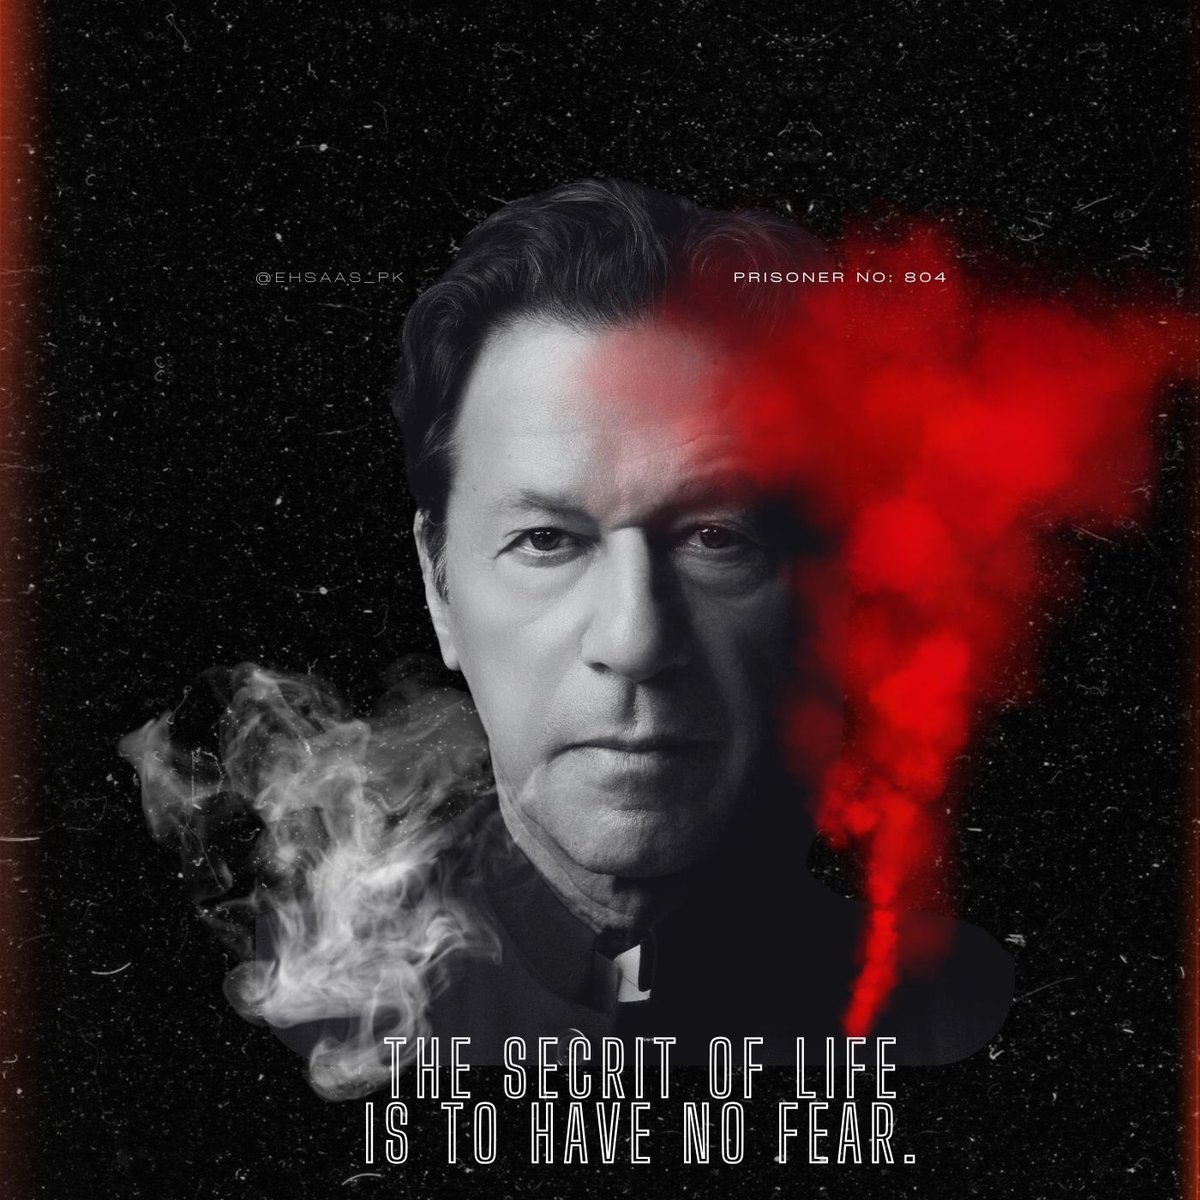 The Secrit of life is to have no fear. #ImranKhan #PTI #PMIK #IK #prisonerno804 #Pakistan